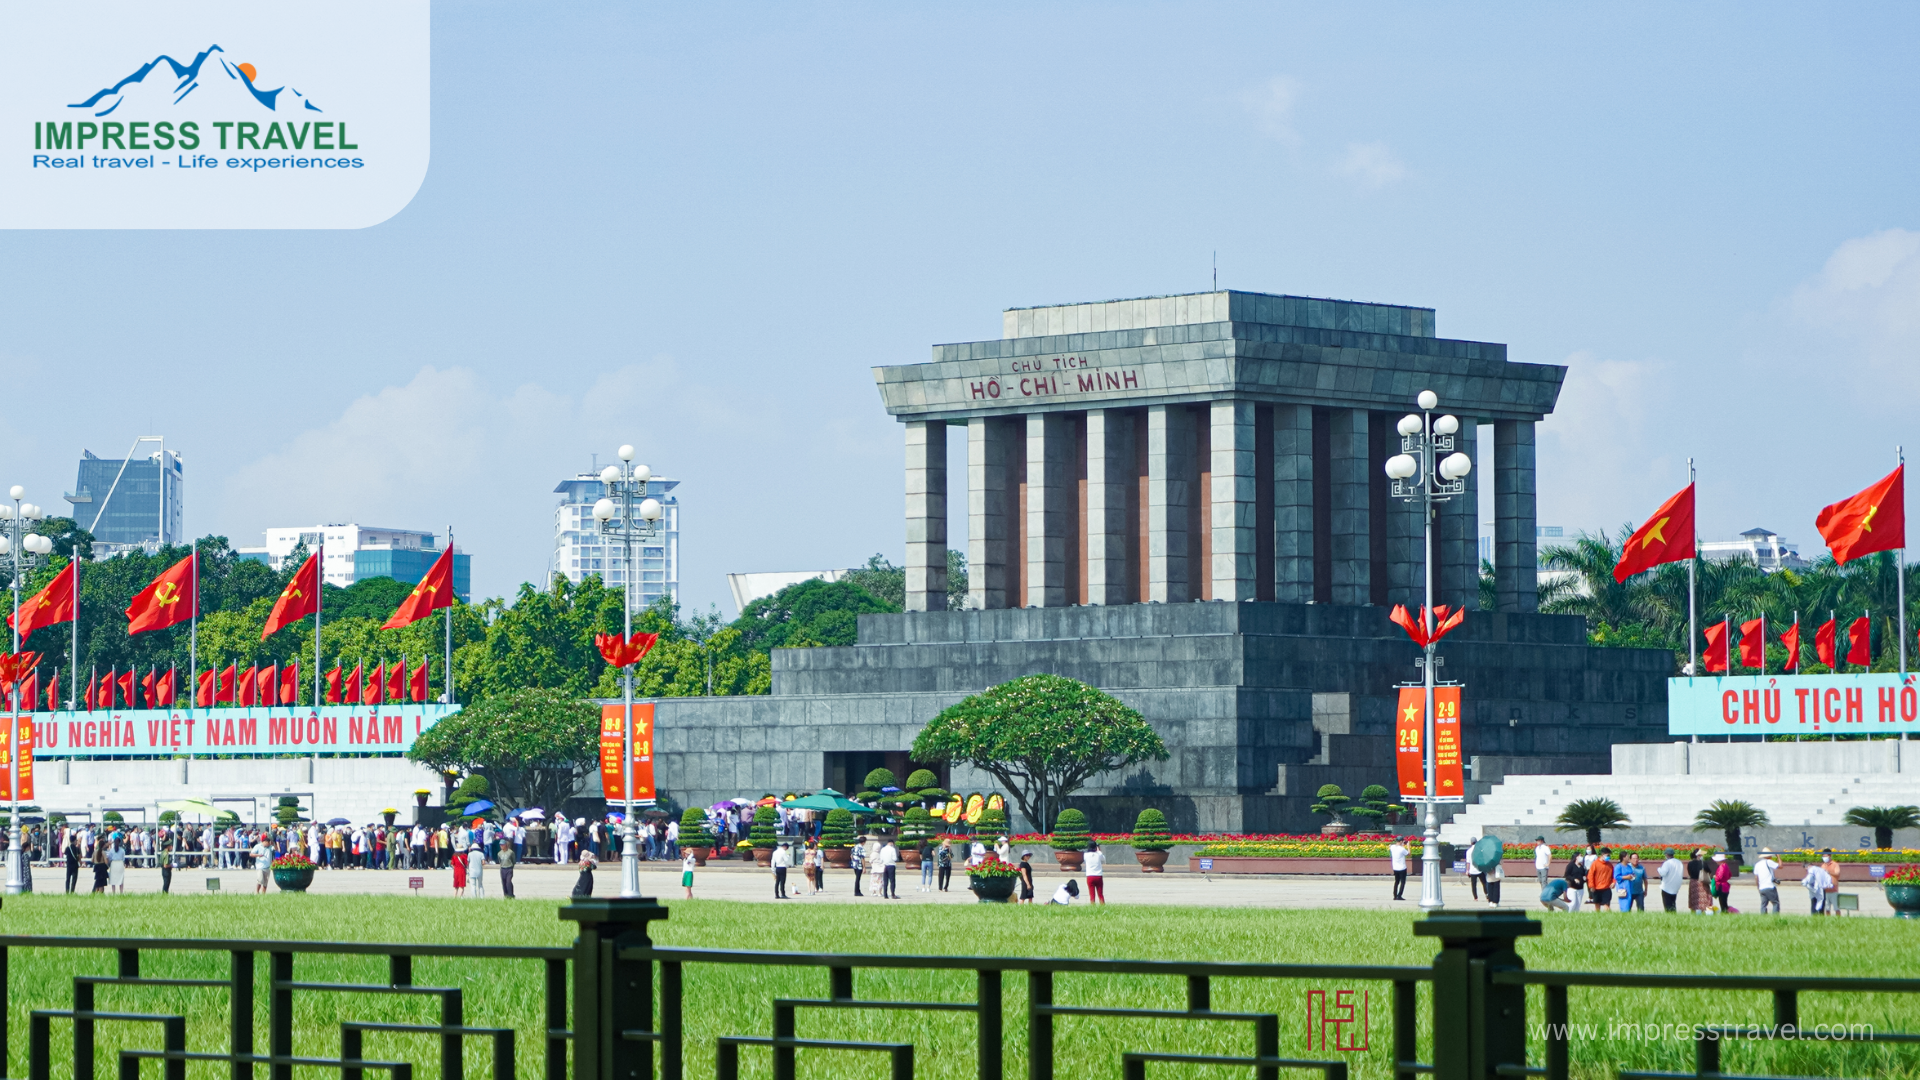 Must-visit attractions in Hanoi: Ho Chi Minh Mausoleum and Museum